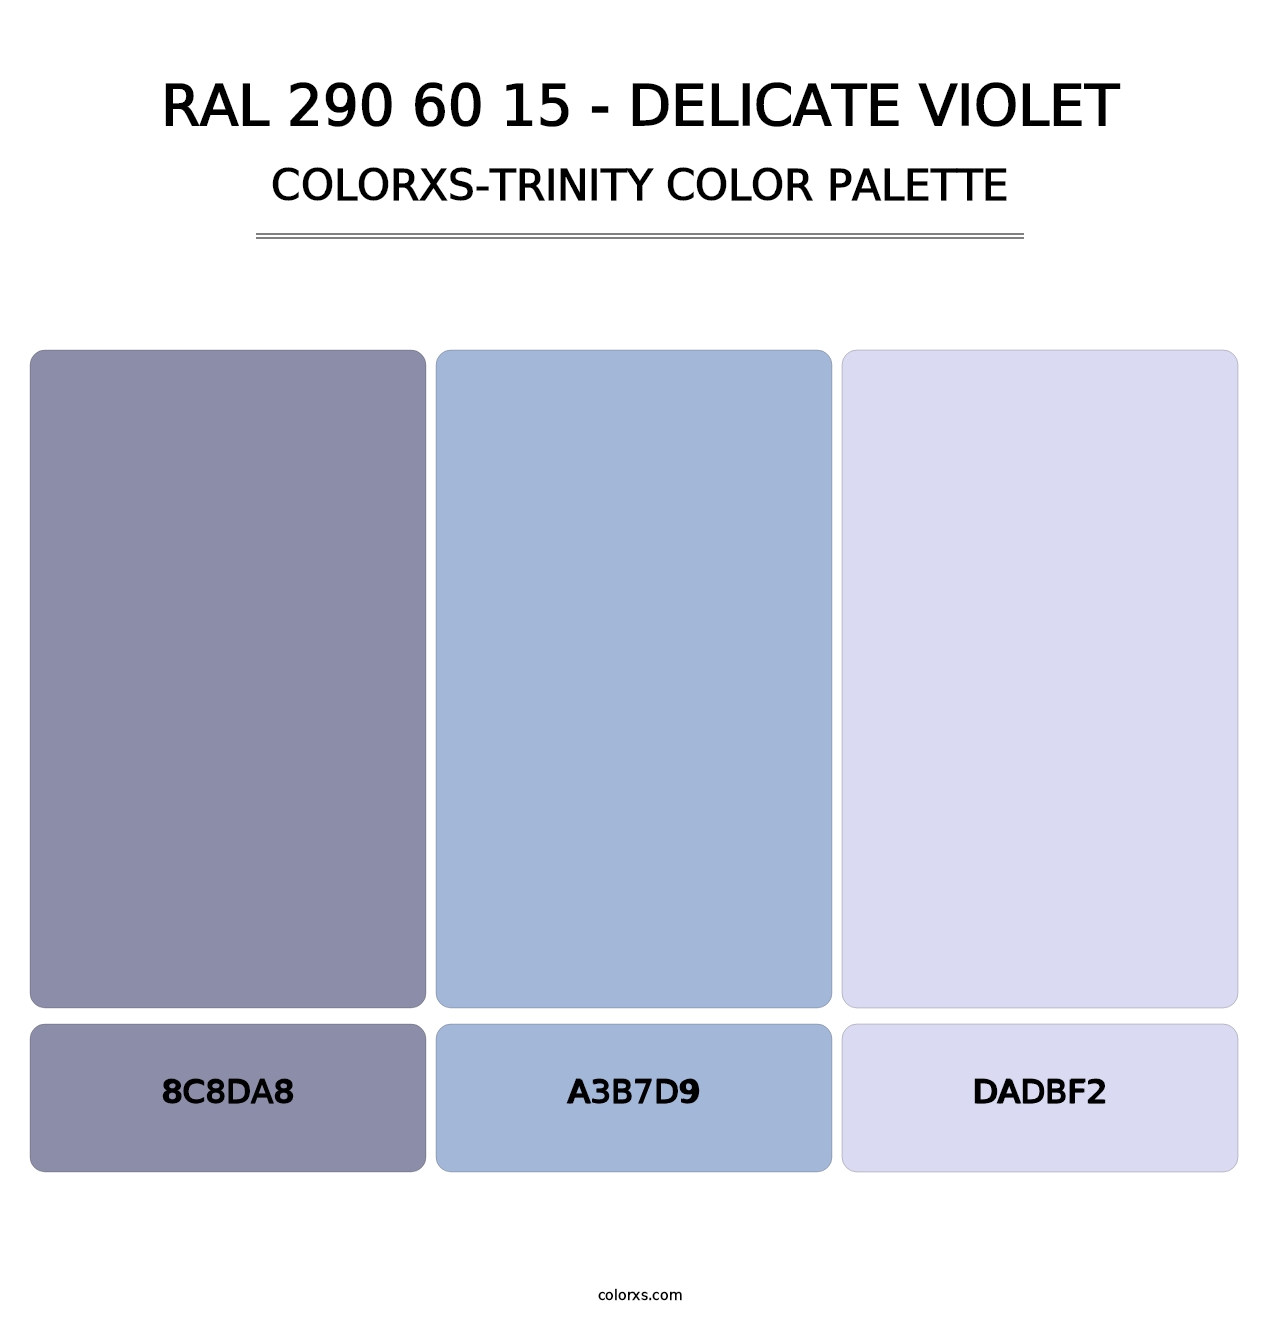 RAL 290 60 15 - Delicate Violet - Colorxs Trinity Palette